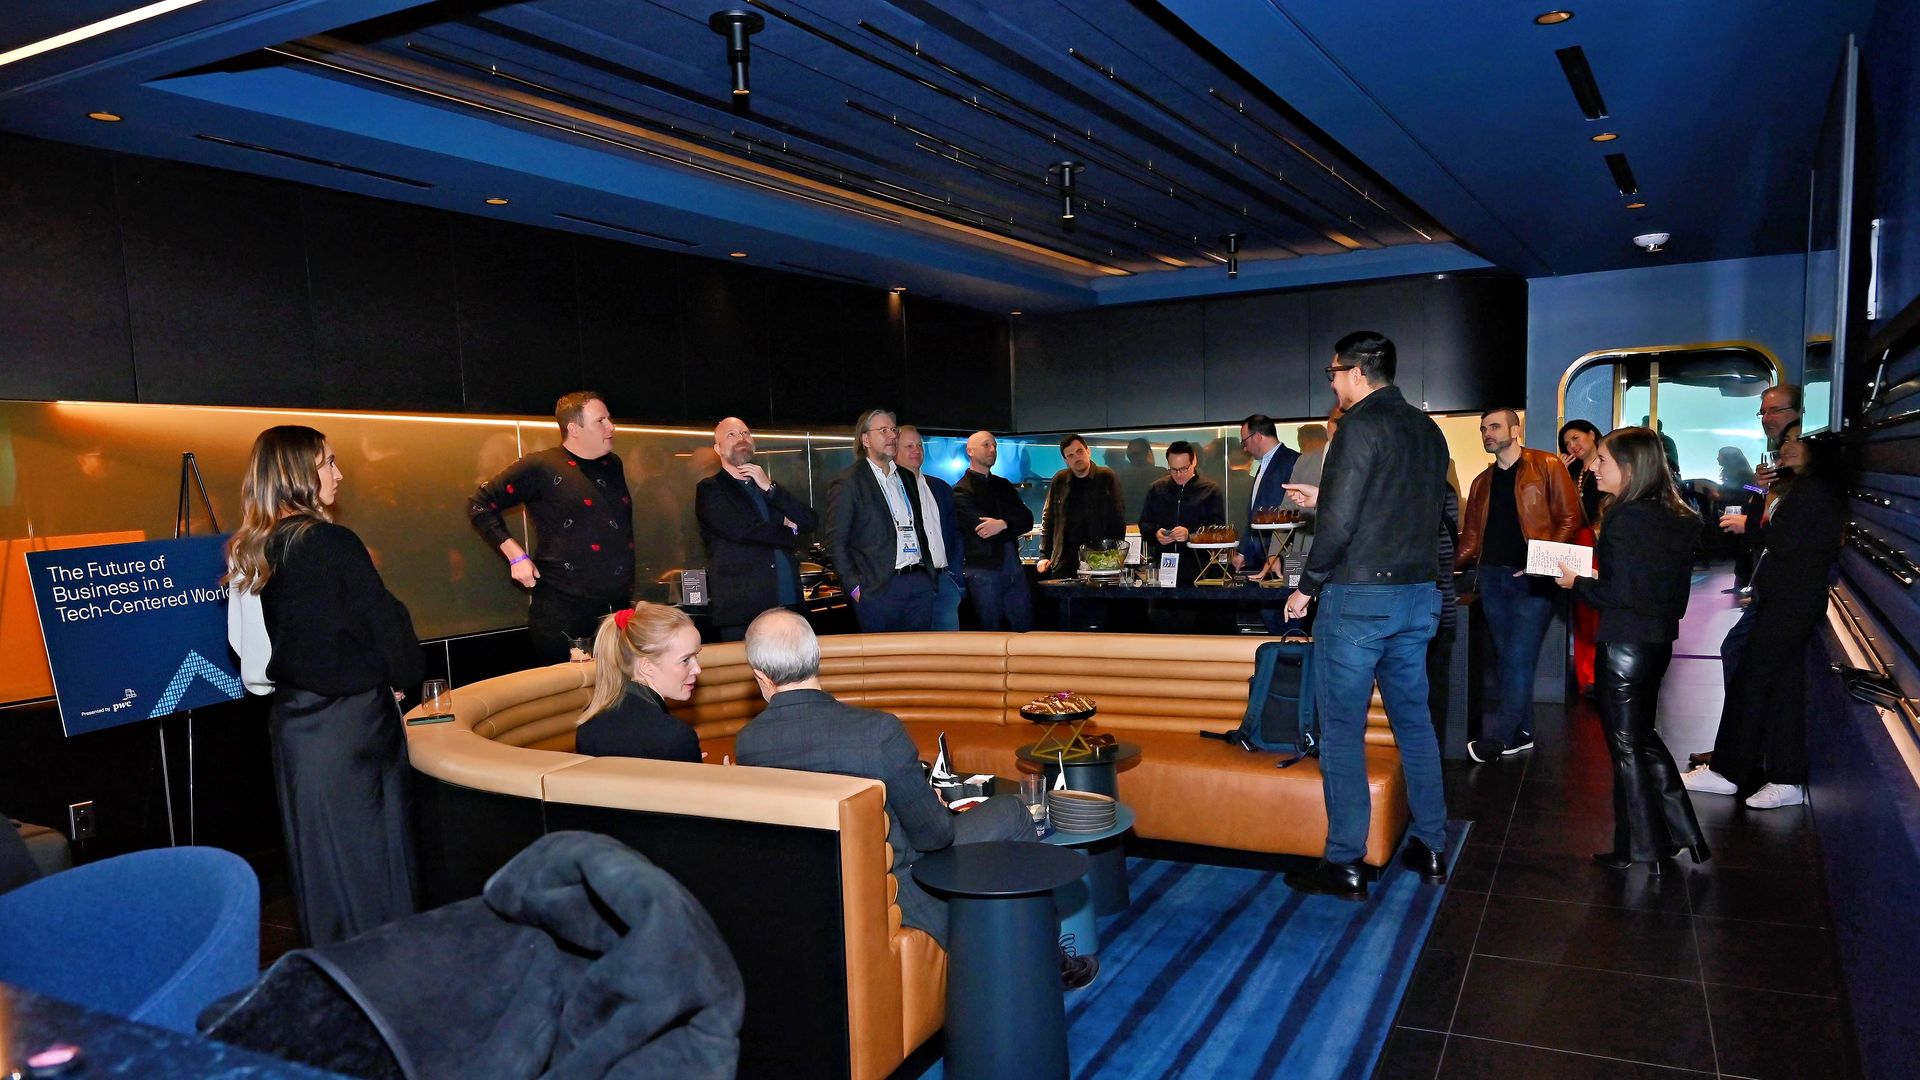 Attendees gathered in a sleek and intimate event venue space for an evening of networking and conversation. 